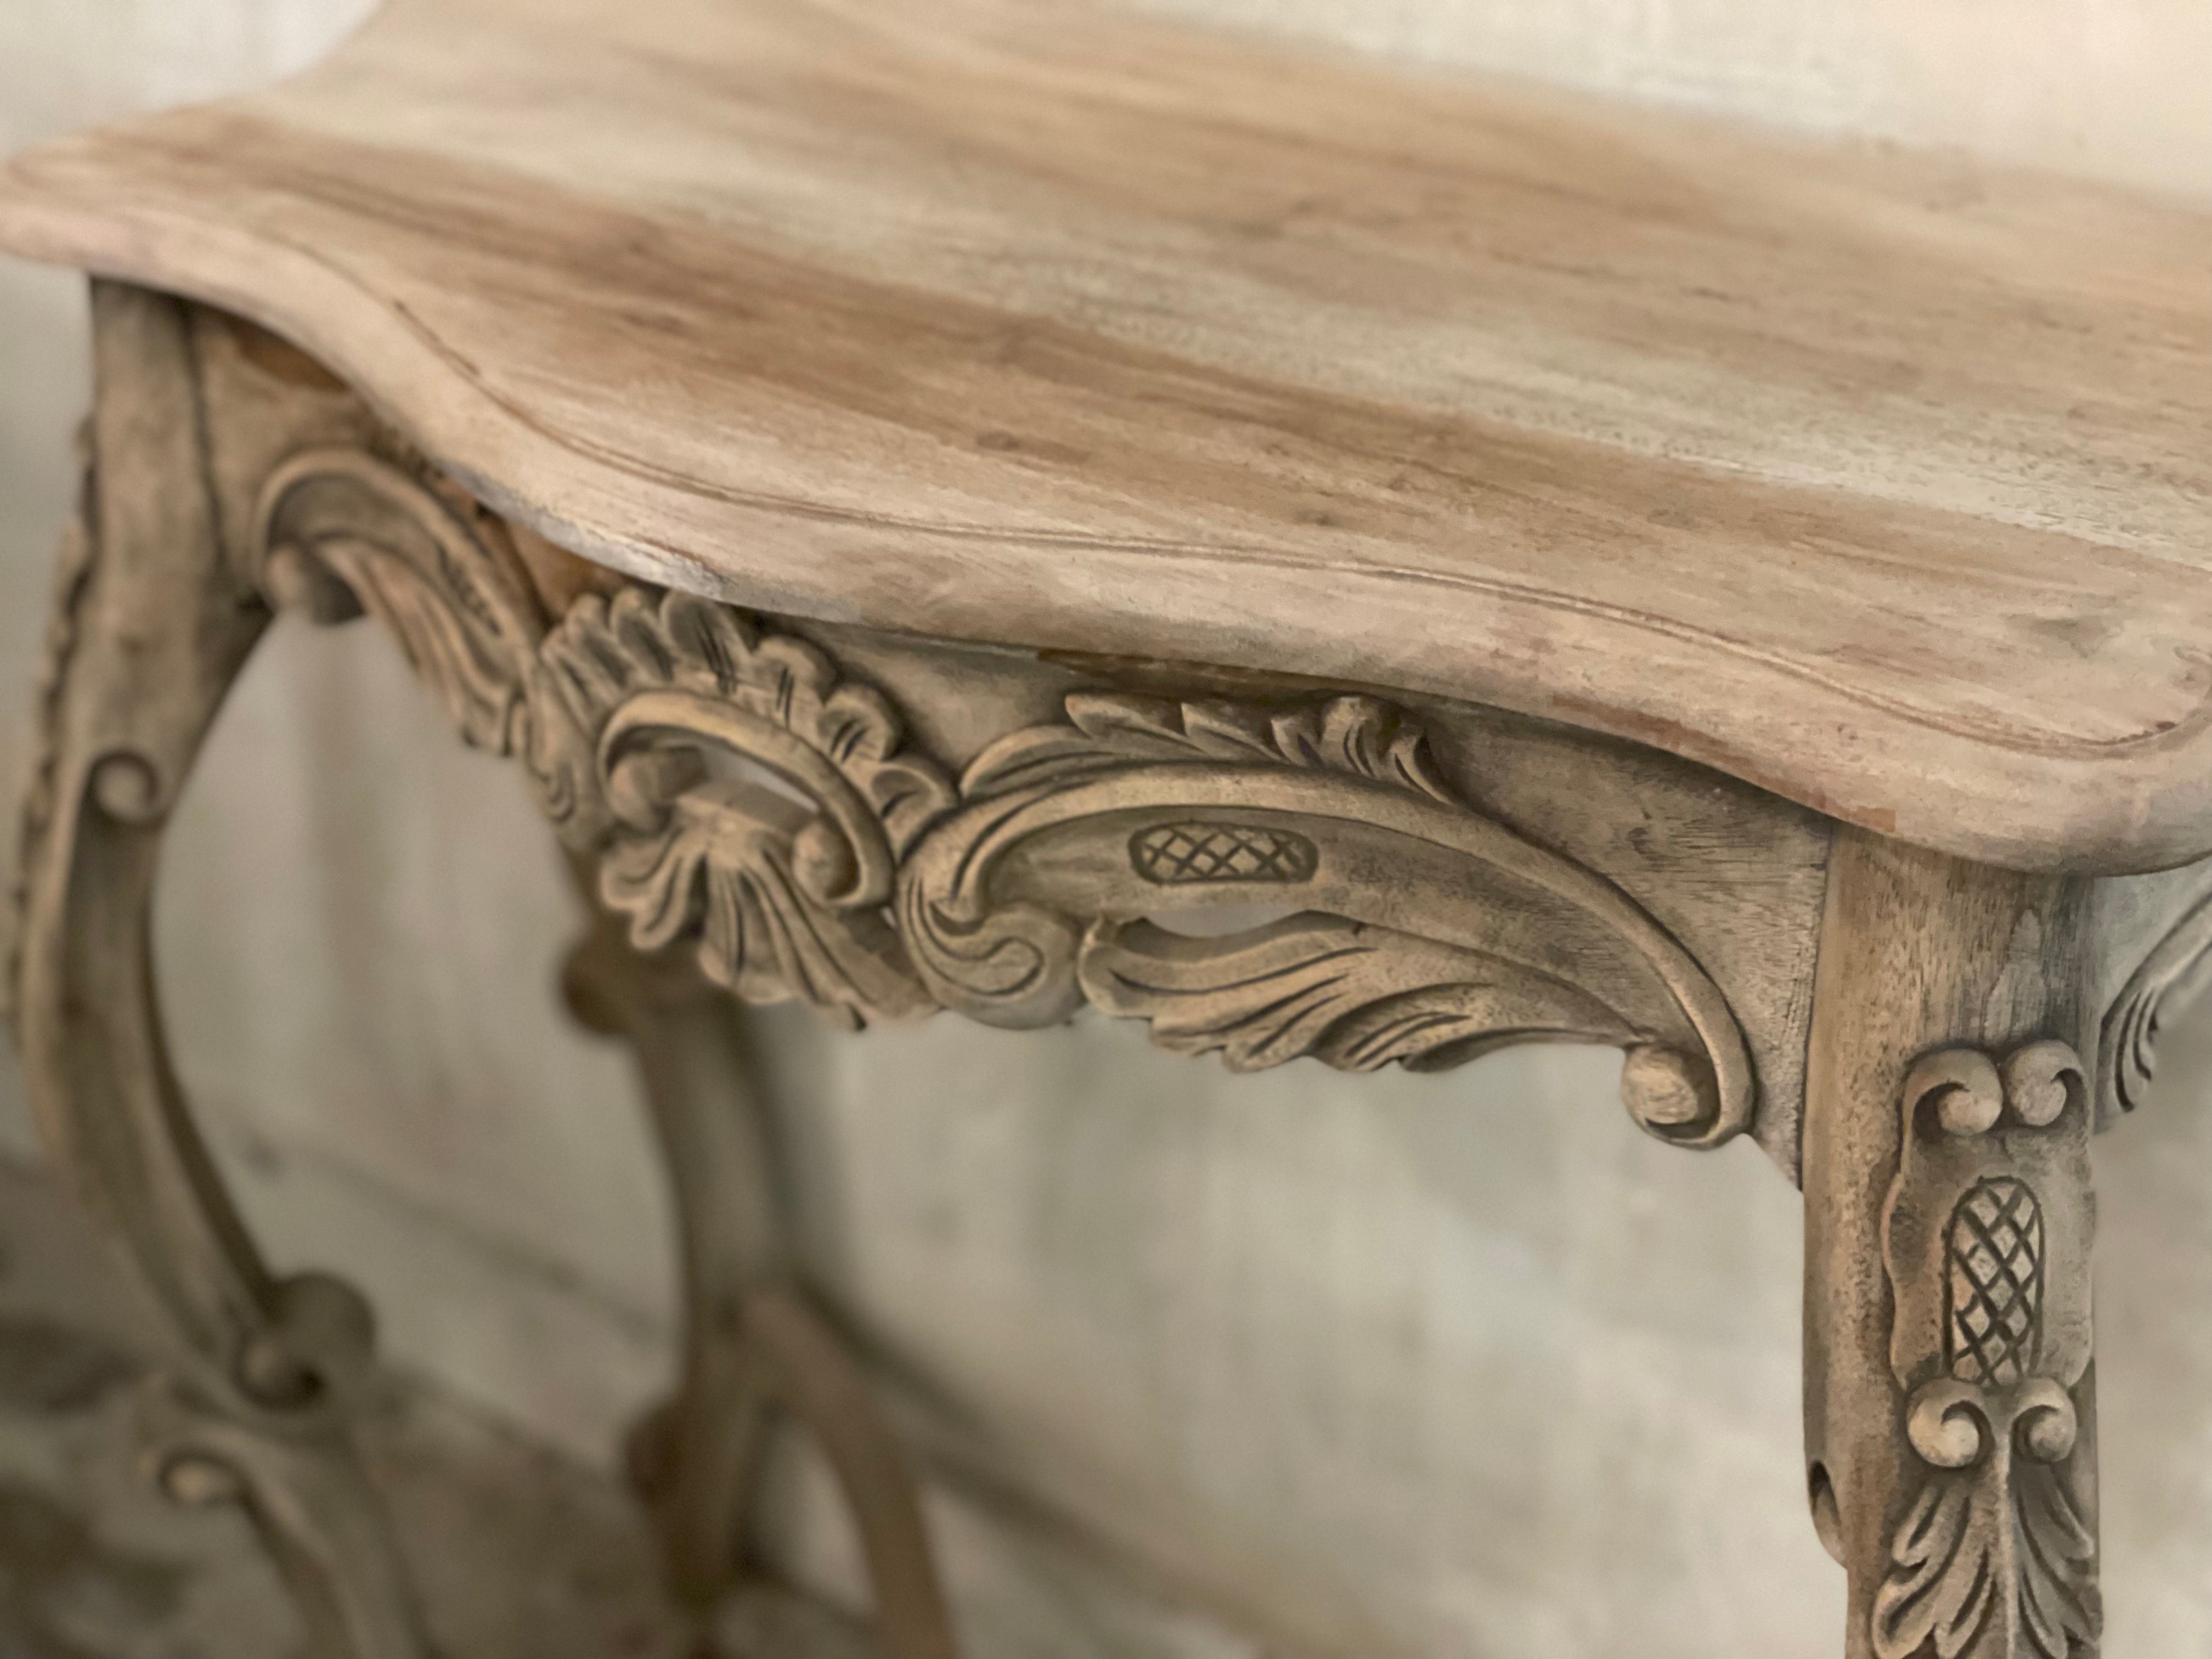 Carved console table